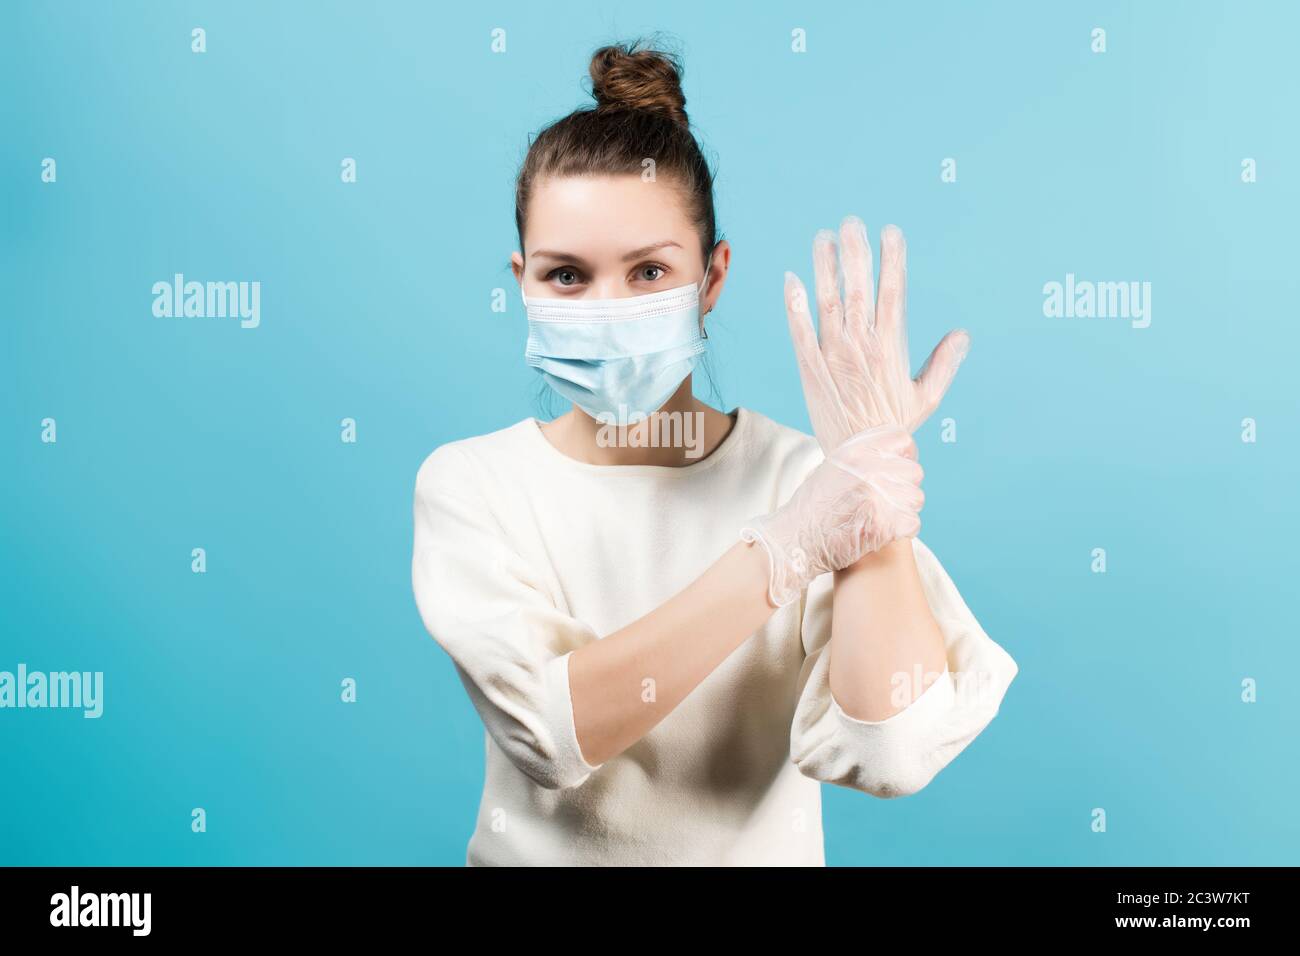 woman paramedic in medical mask and gloves holds her hand with the other hand Stock Photo